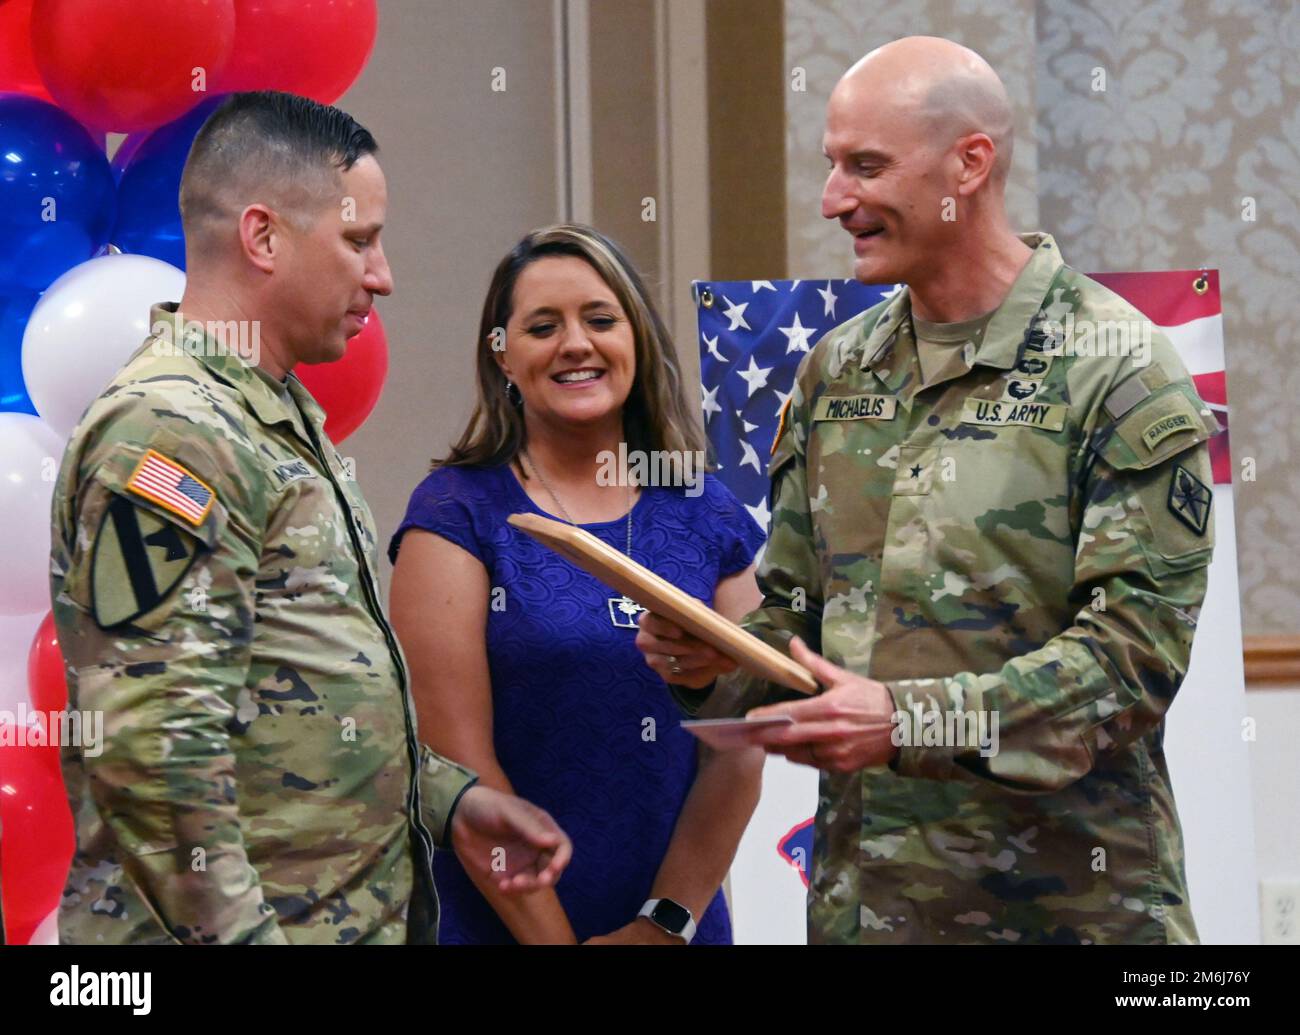 Lt. Col. Paul McManus, commander of 3rd Battalion, 60th Infantry Regiment, accepts a volunteer of the year award on behalf of his wife Kate during the Family of the Year/Volunteer of the Year ceremony April 28. Stock Photo